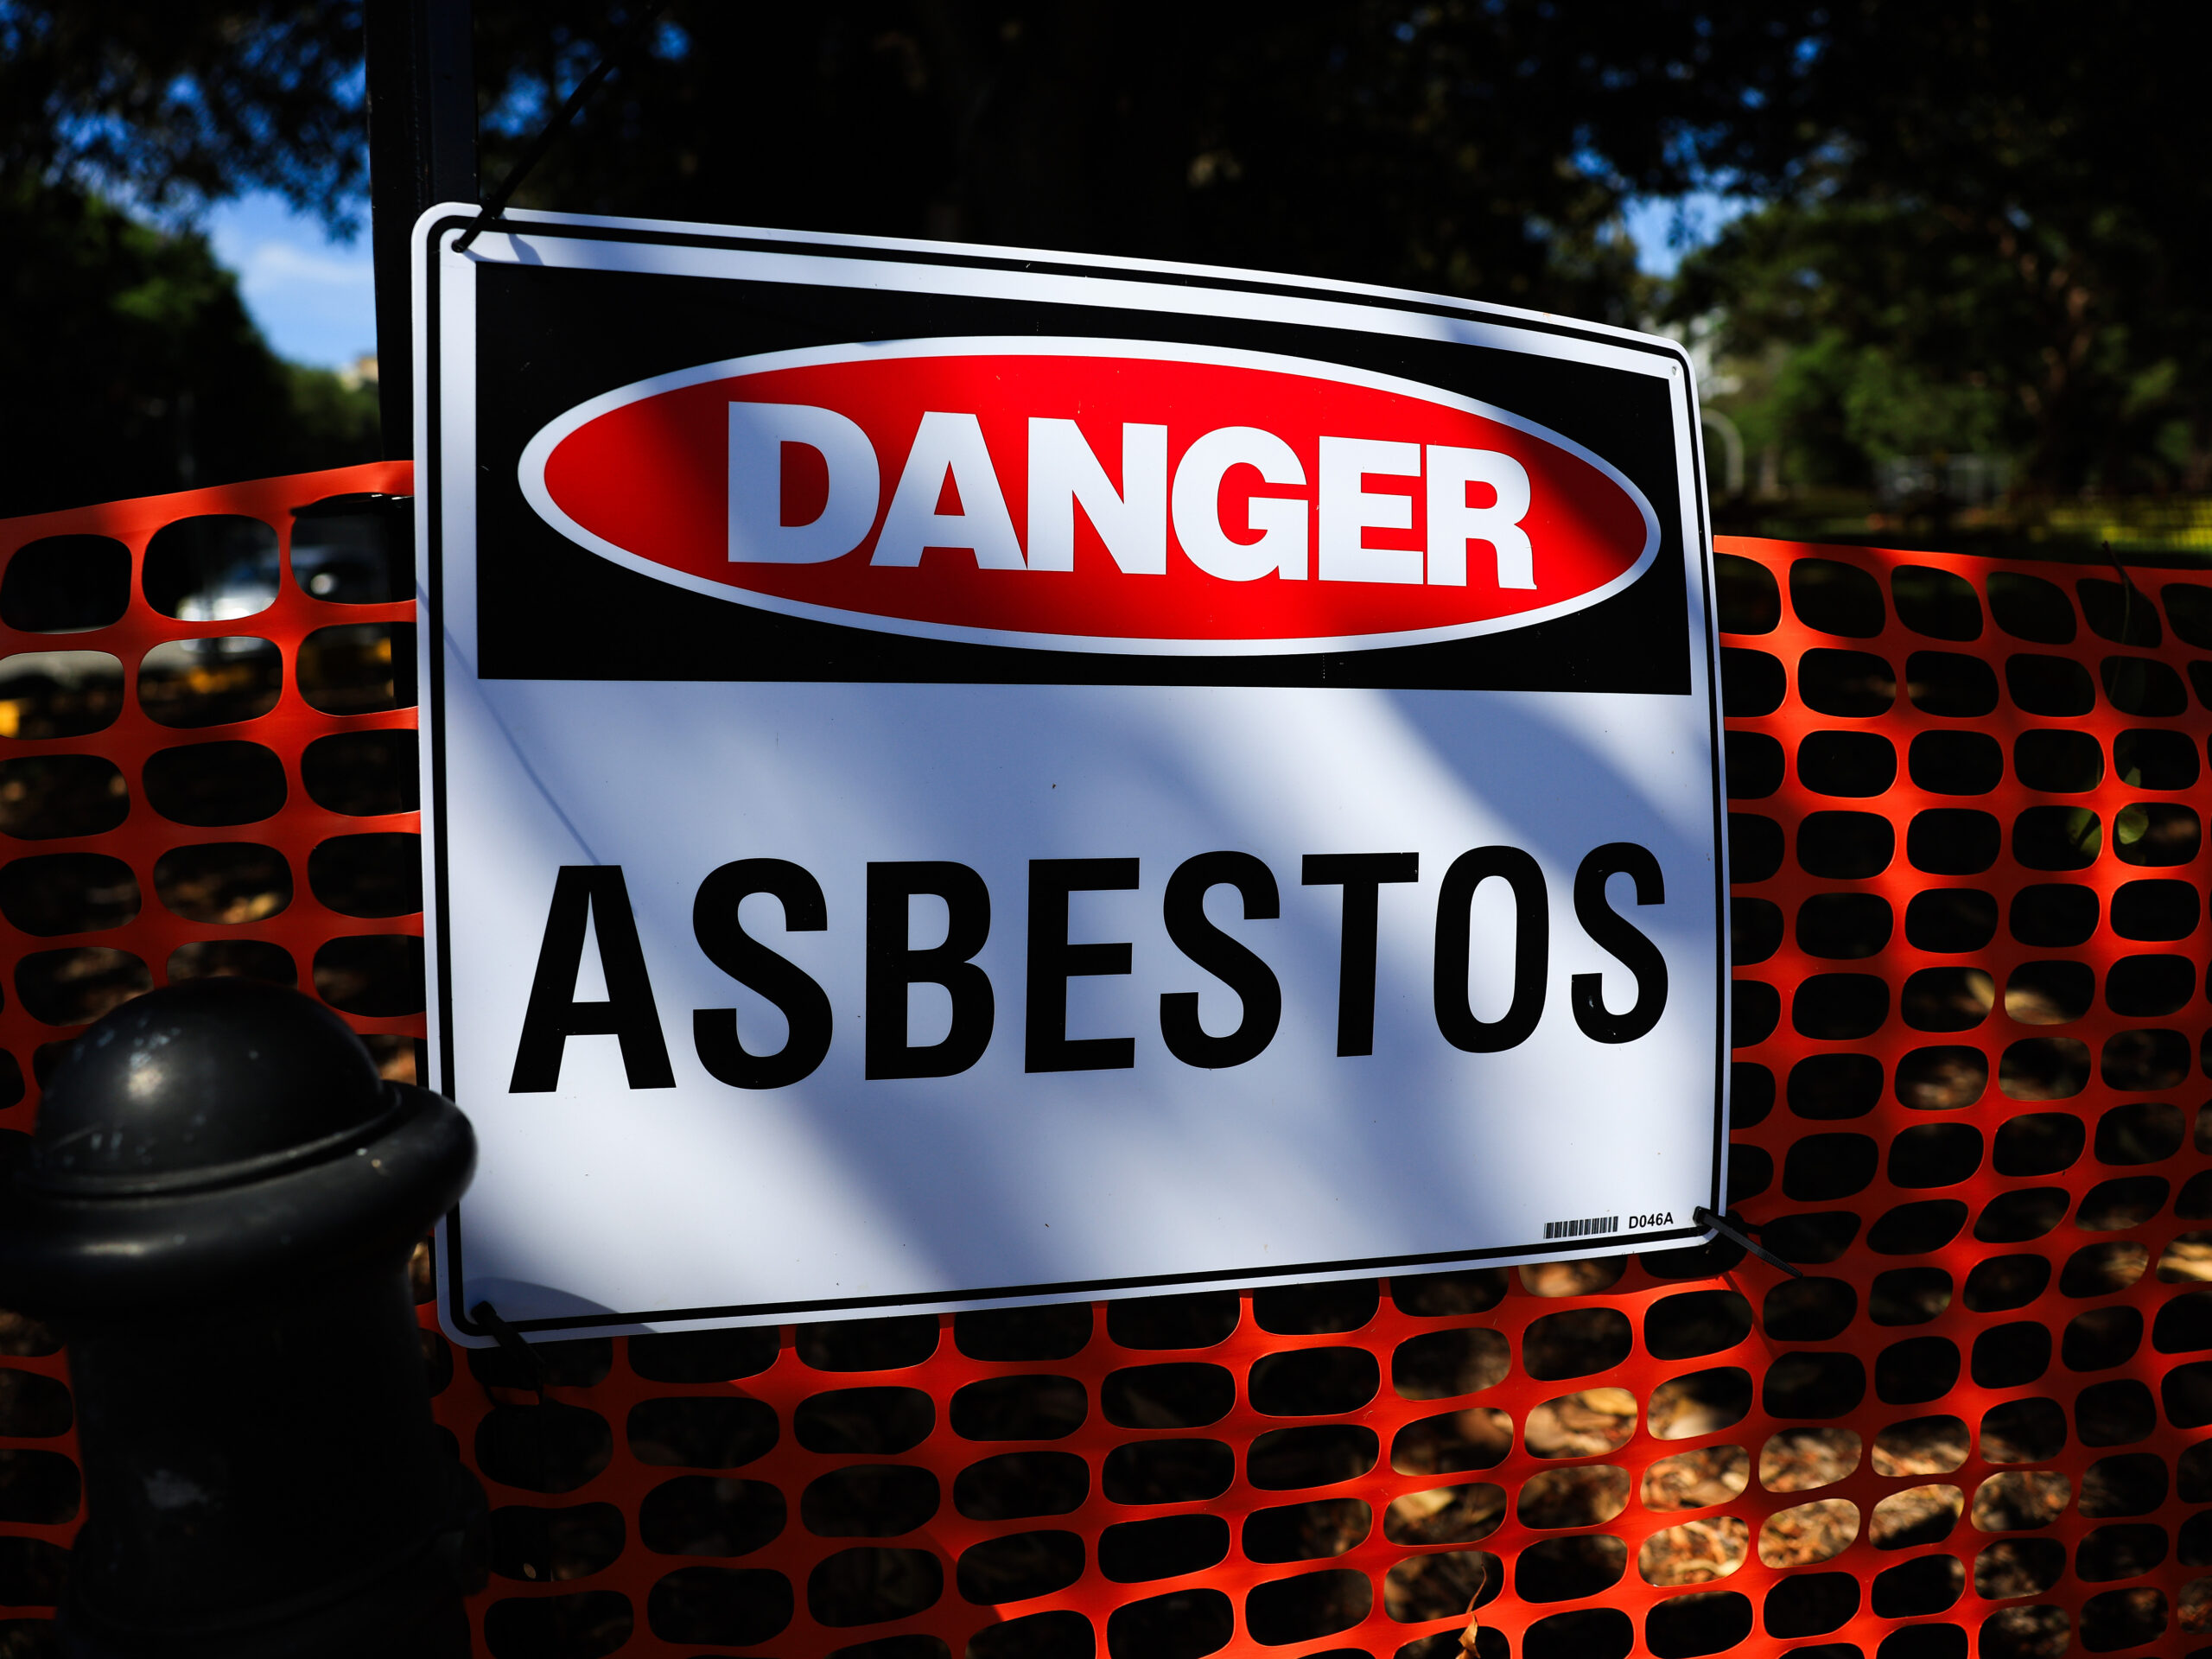 The U.S. bans most common form of asbestos, after decades of pushback from industry